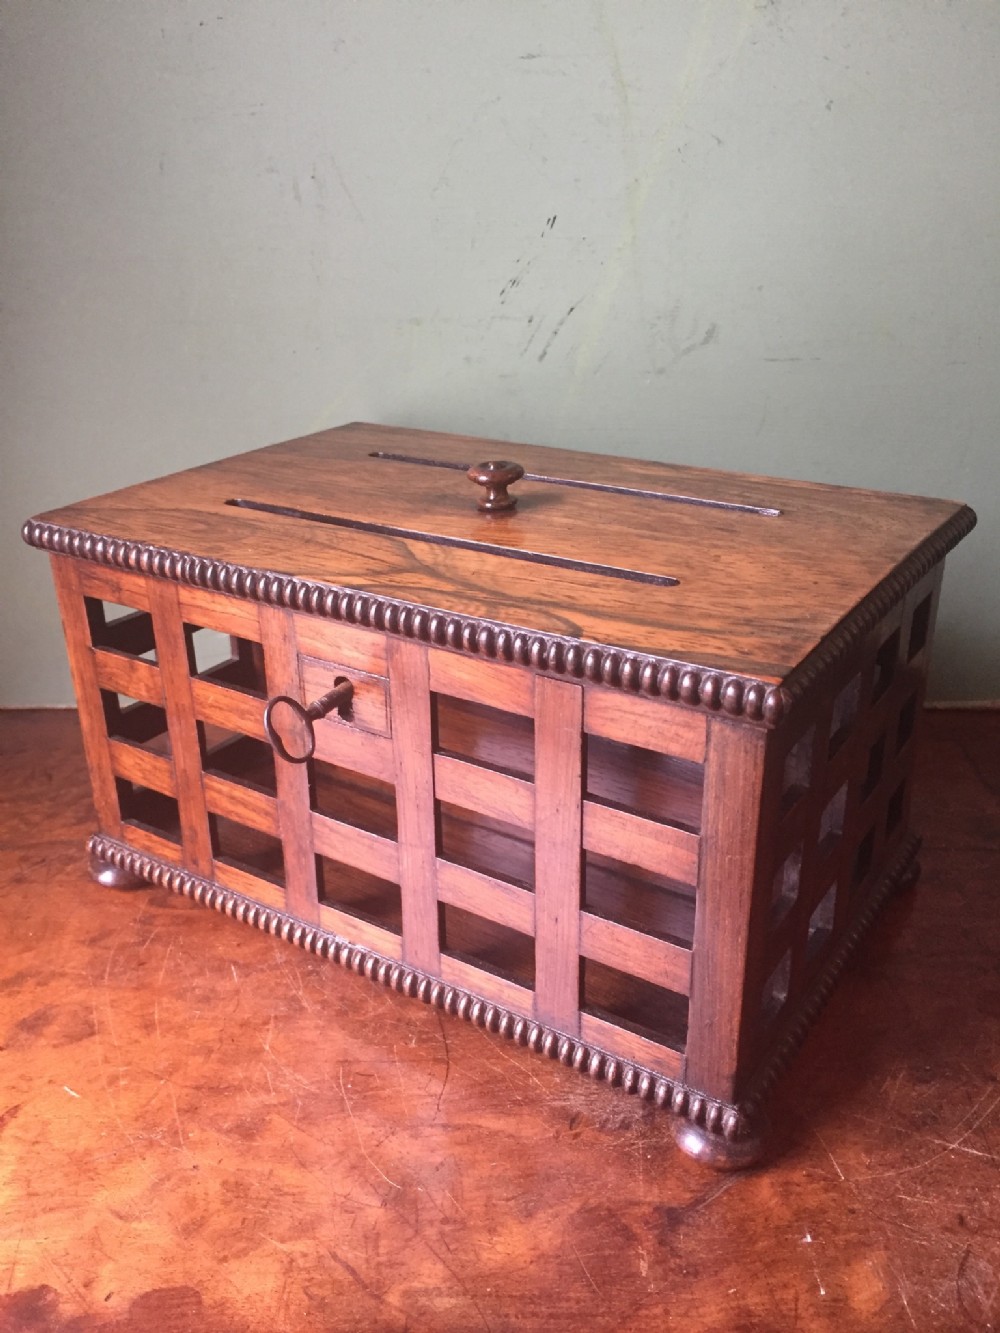 fine quality early c19th regency period rosewood correspondence or letterbox desktop casket